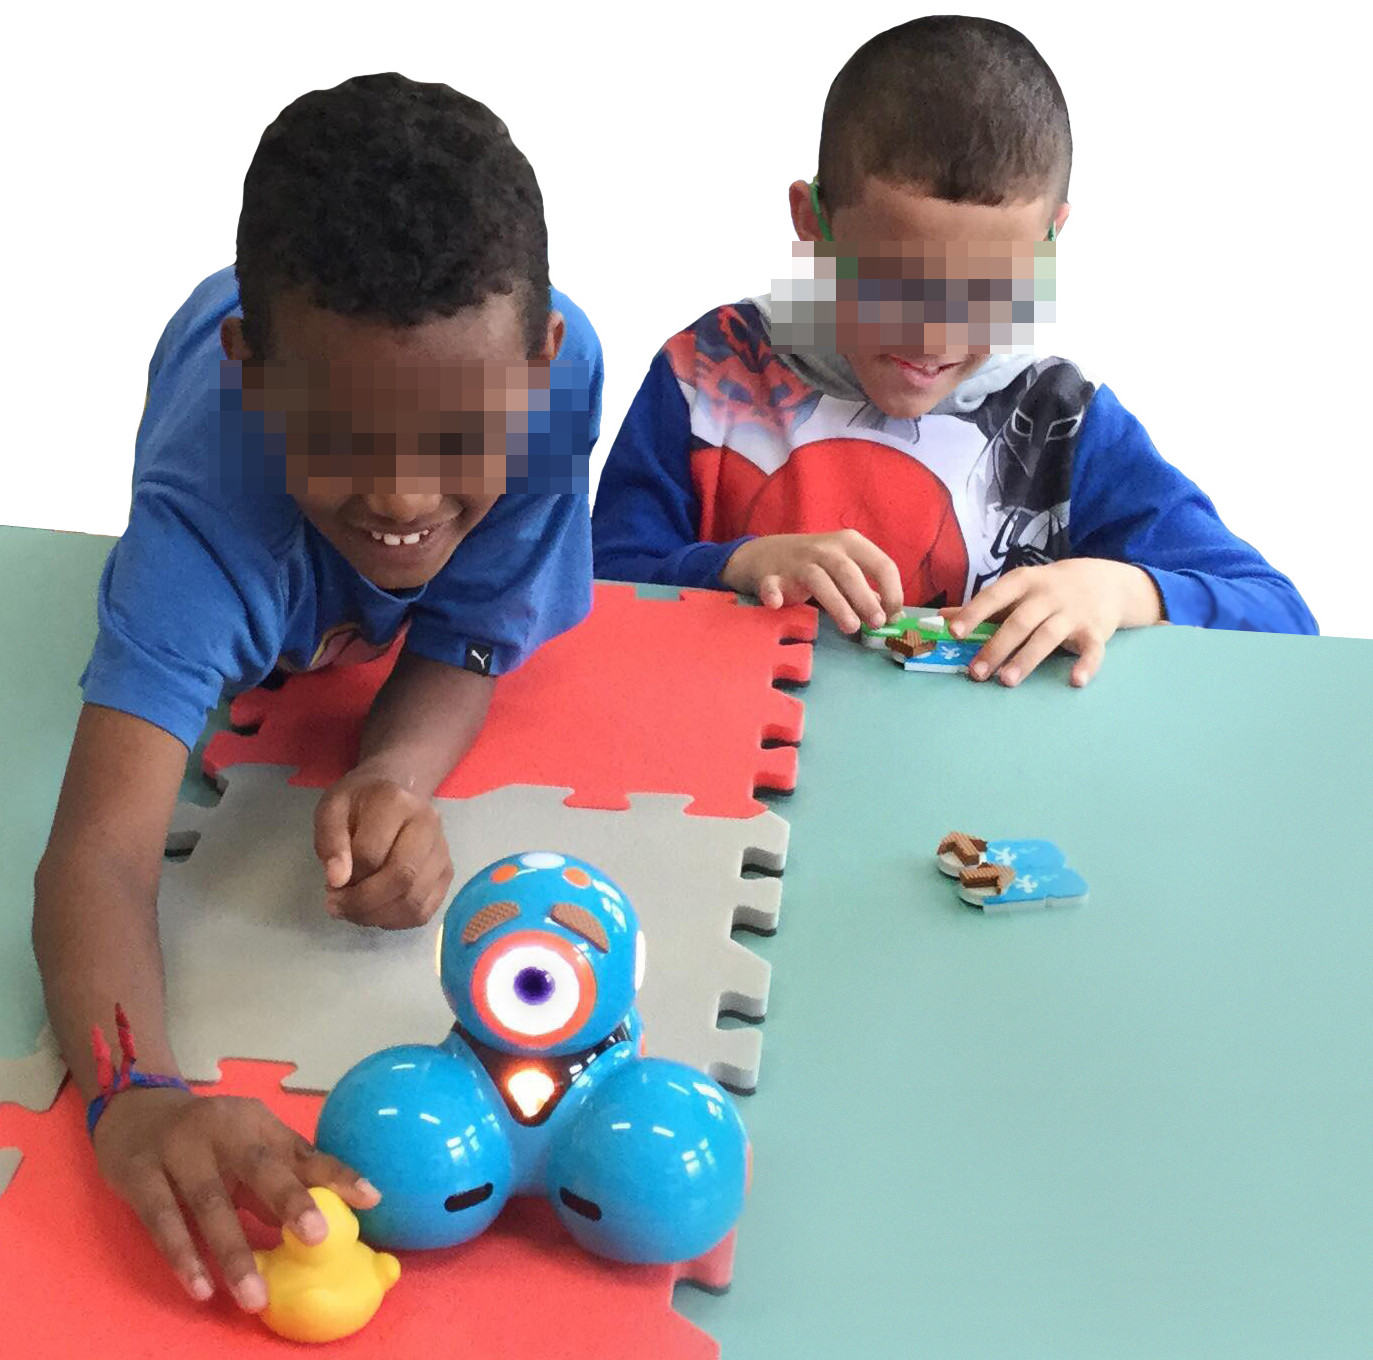 Photo taken from the Workshop with children. Two visually impaired children perform a goal-directed programming activity using a map located on the table. The activity consists of moving the robot to reach the duck. The map is made of 4 EVA foam tiles with two different colors. The child on the right is concentrated in arranging the blocks while the children at the left are touching the duck after the robot reached the duck. This child is smiling and has much of his body on the table.